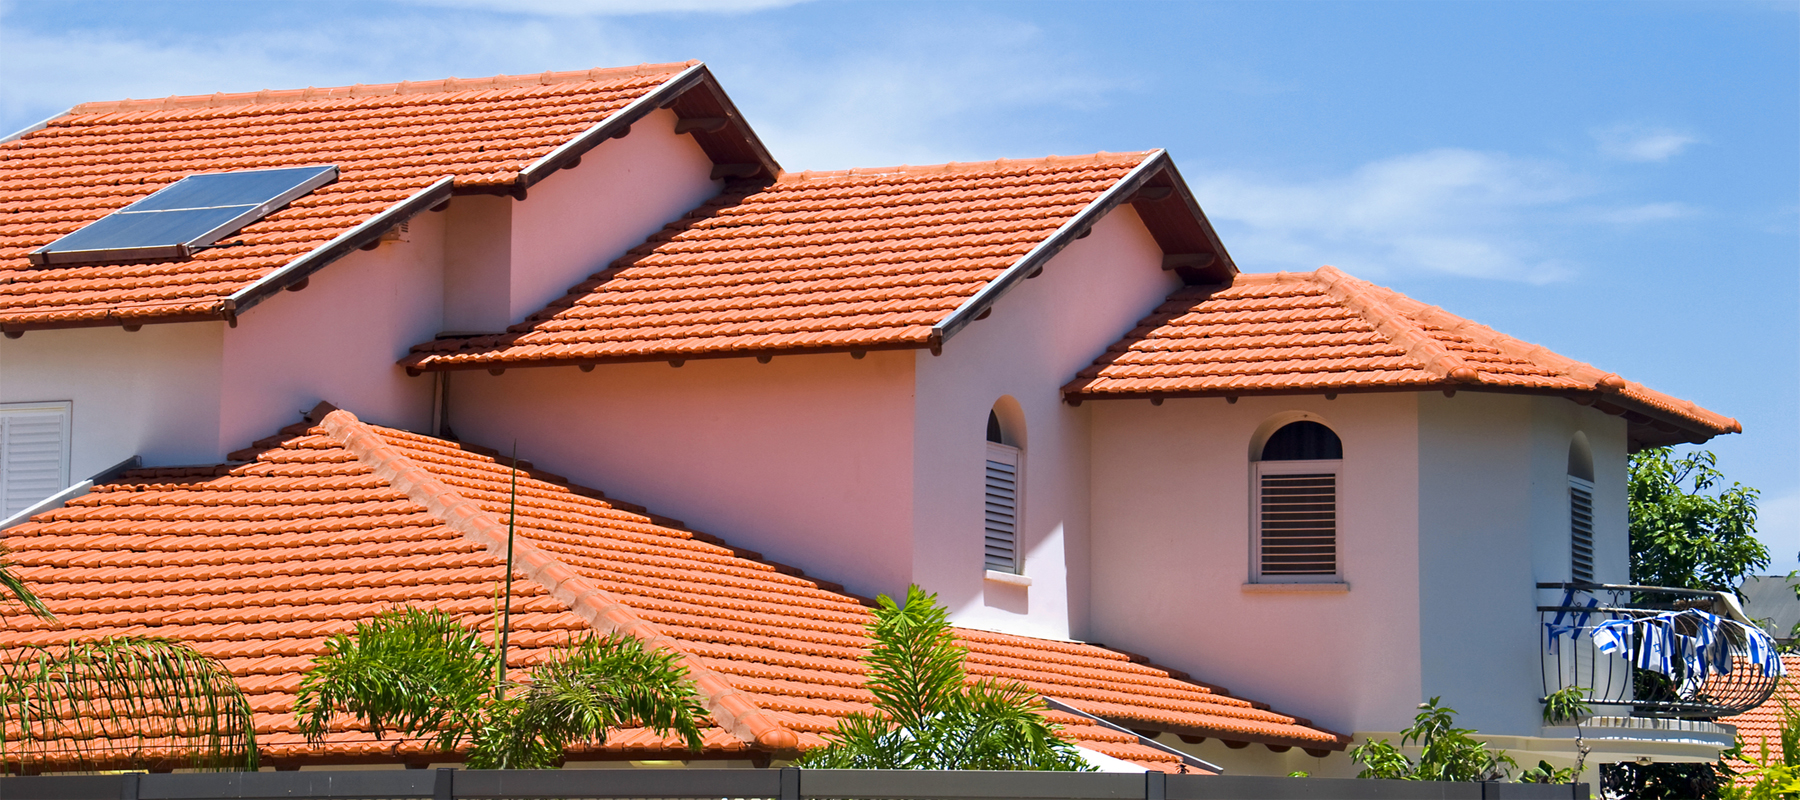 A House with Orange Clay Tile Roof